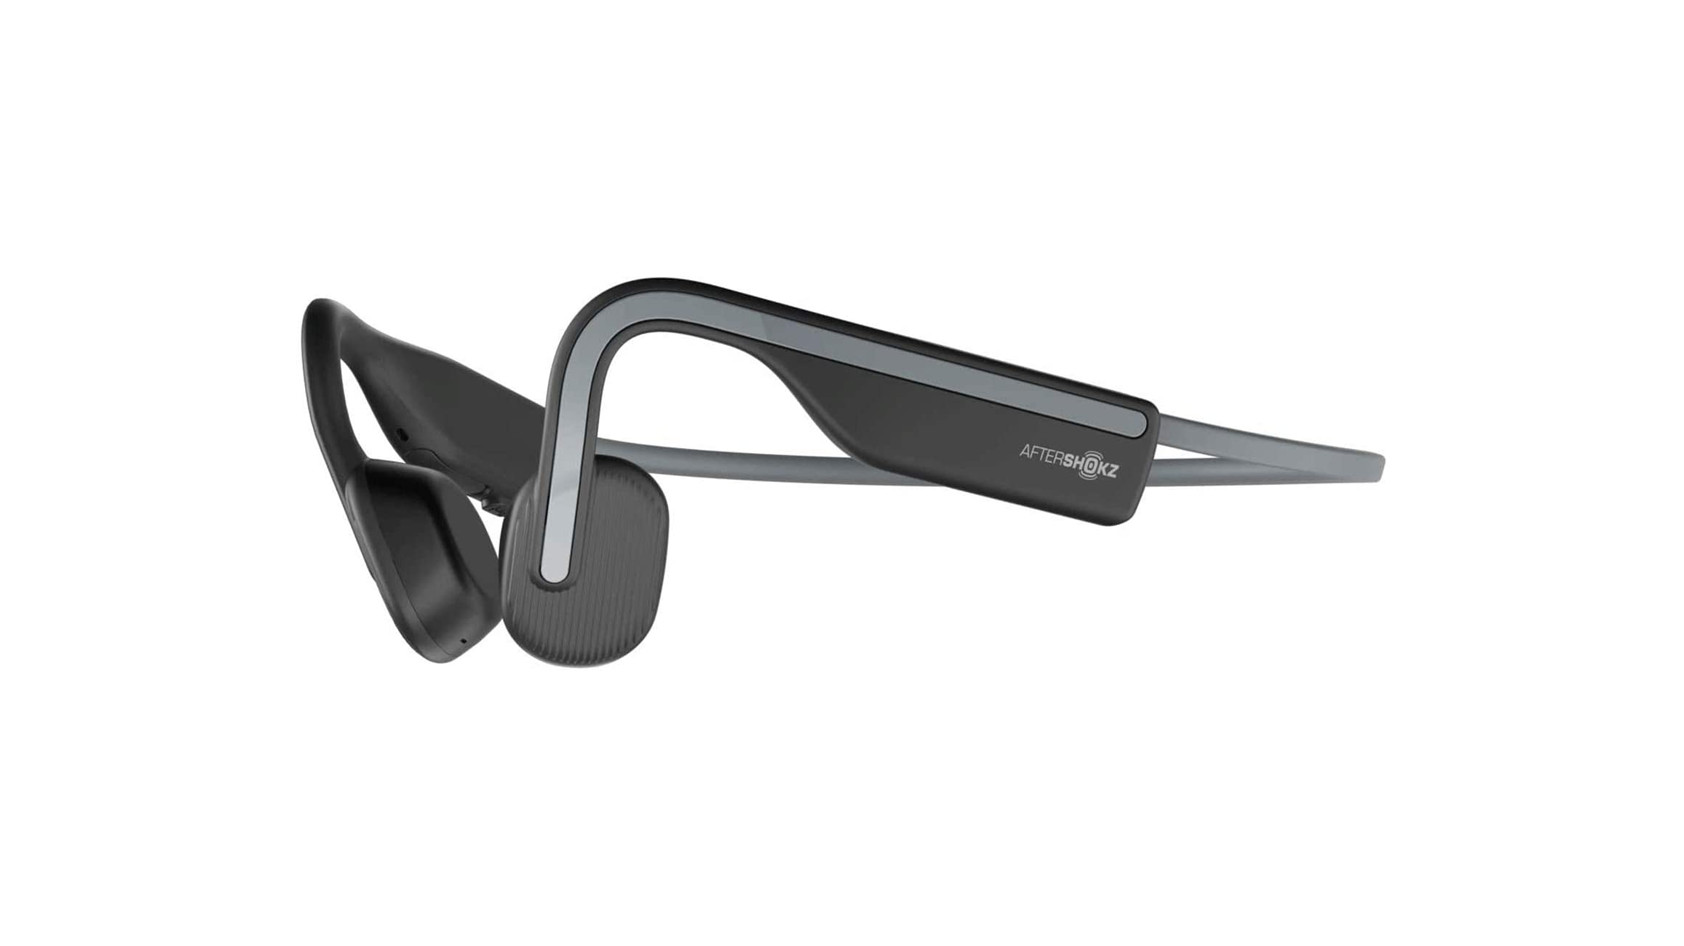 Aftershokz OpenMove bone conduction headphones against a white backgroudn.